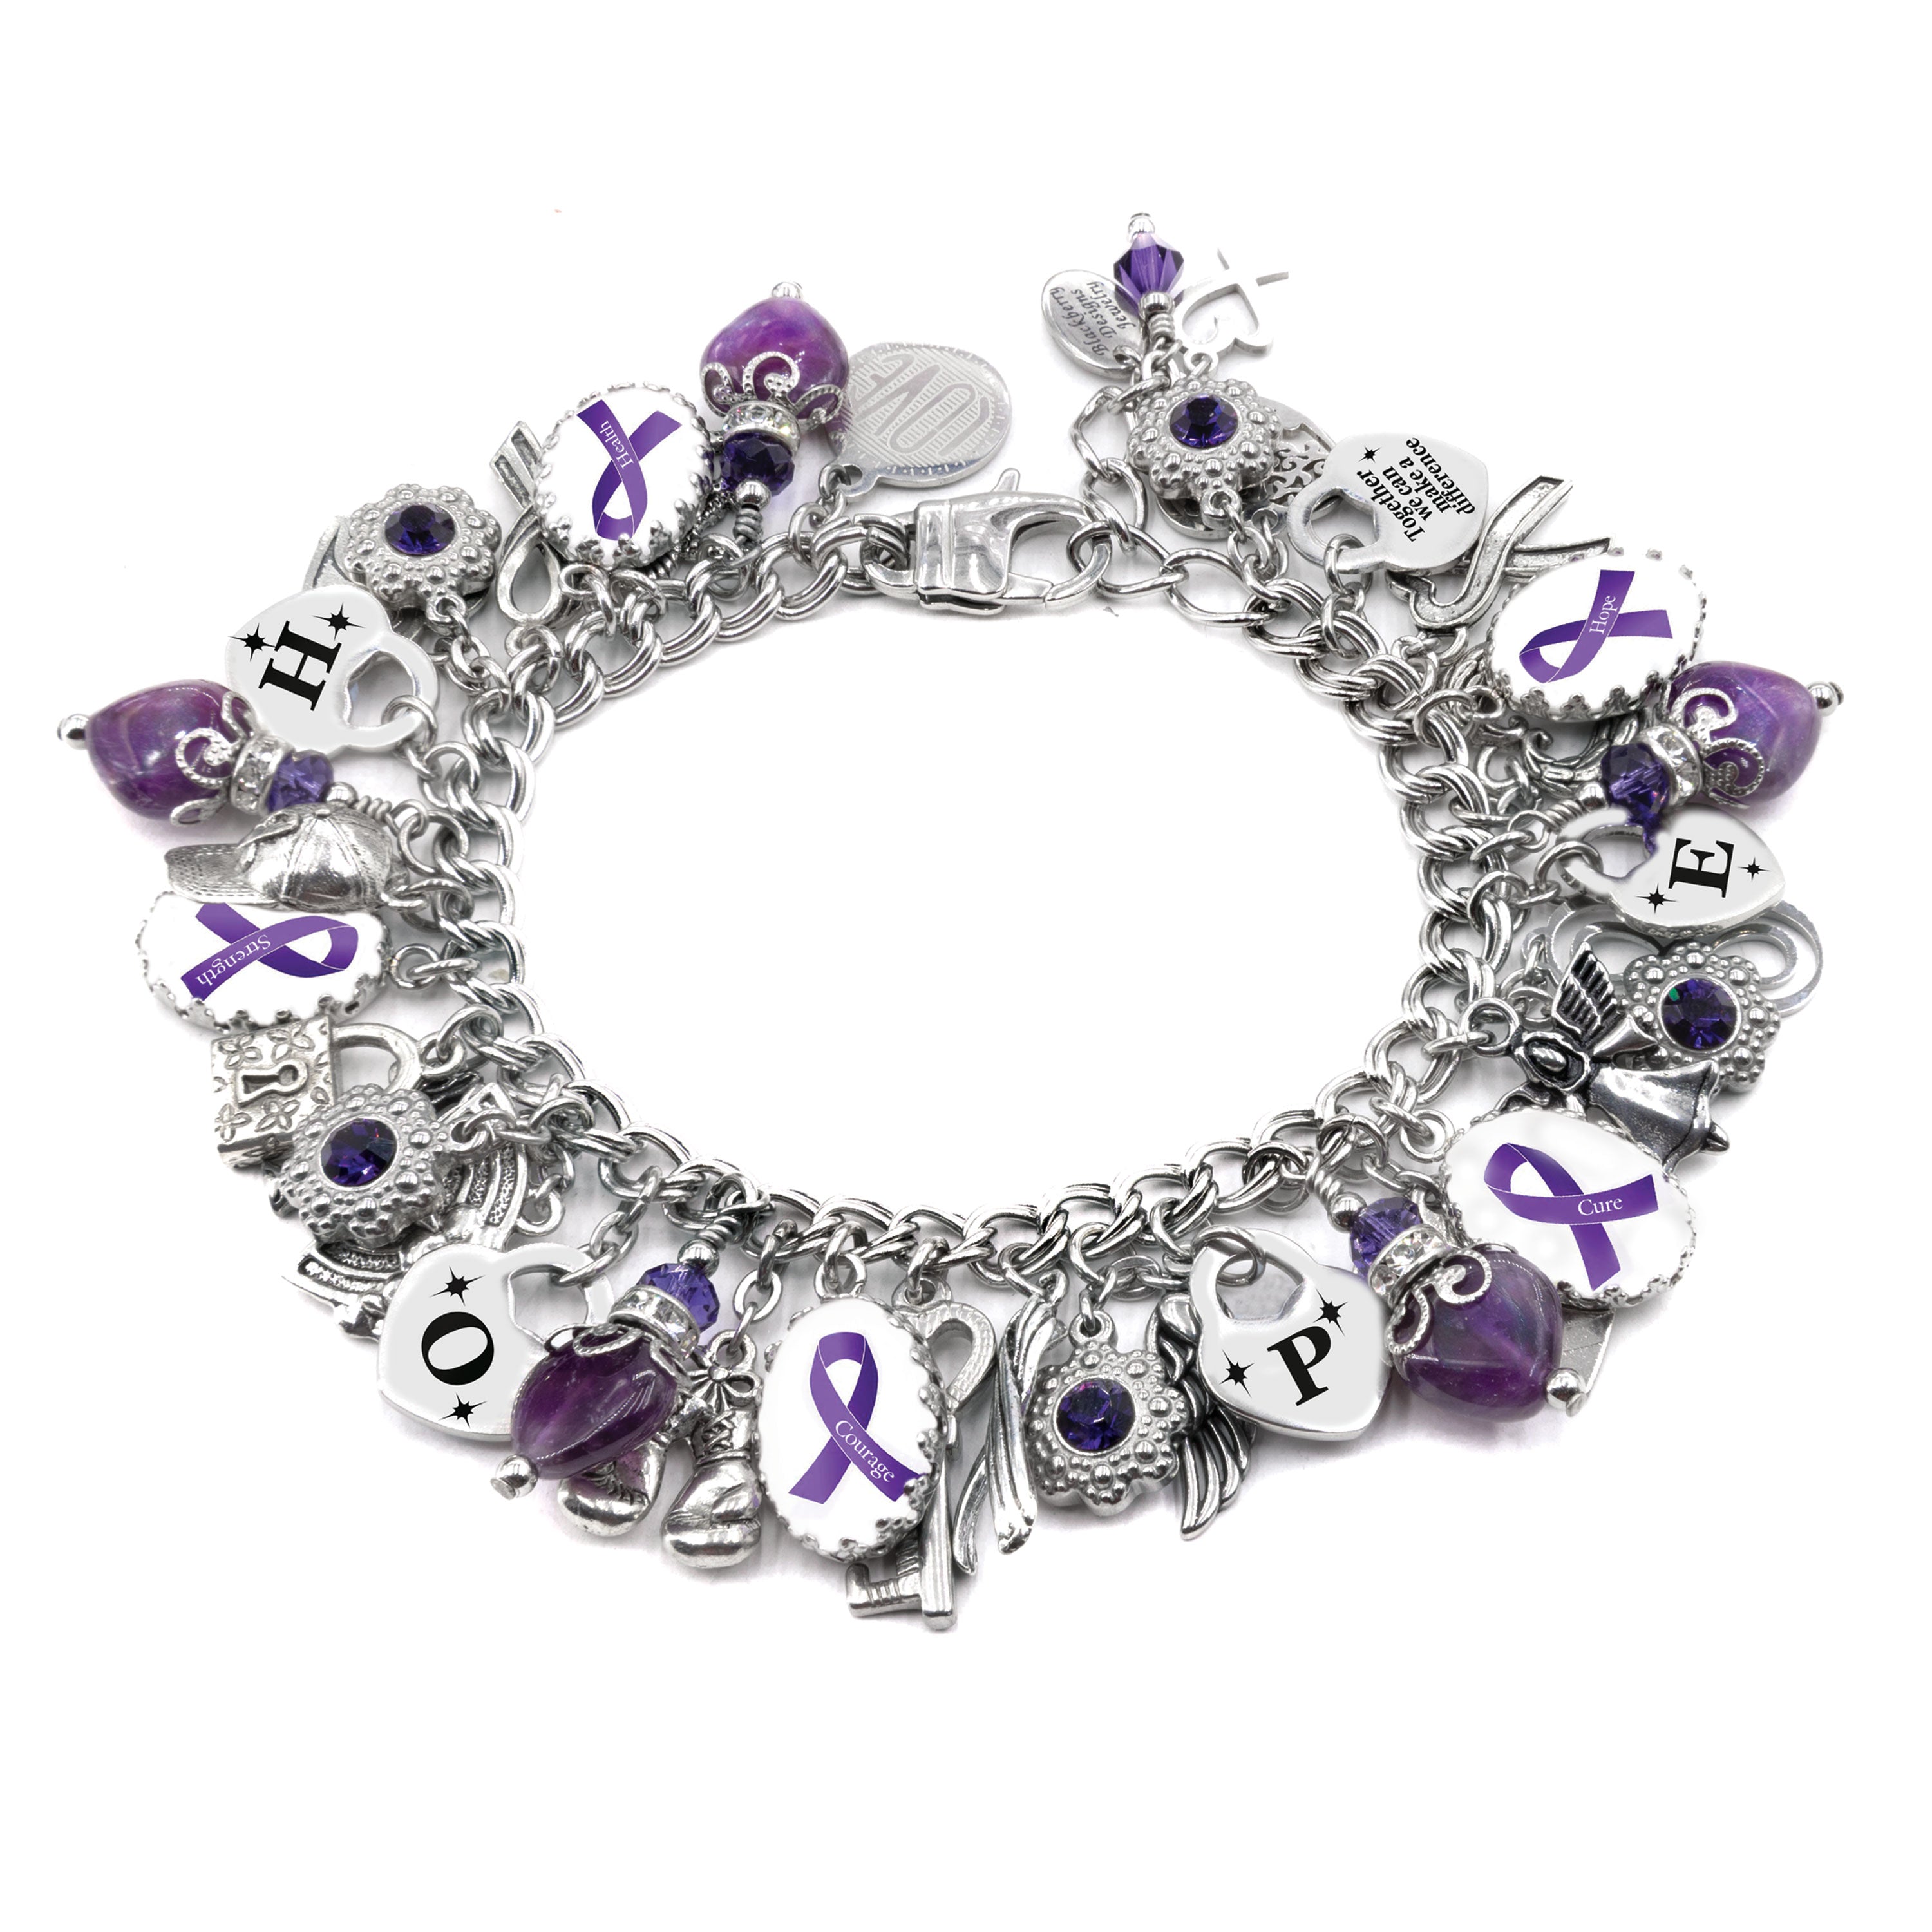 Alzheimer's Awareness Adjustable Ring | The Animal Rescue Site